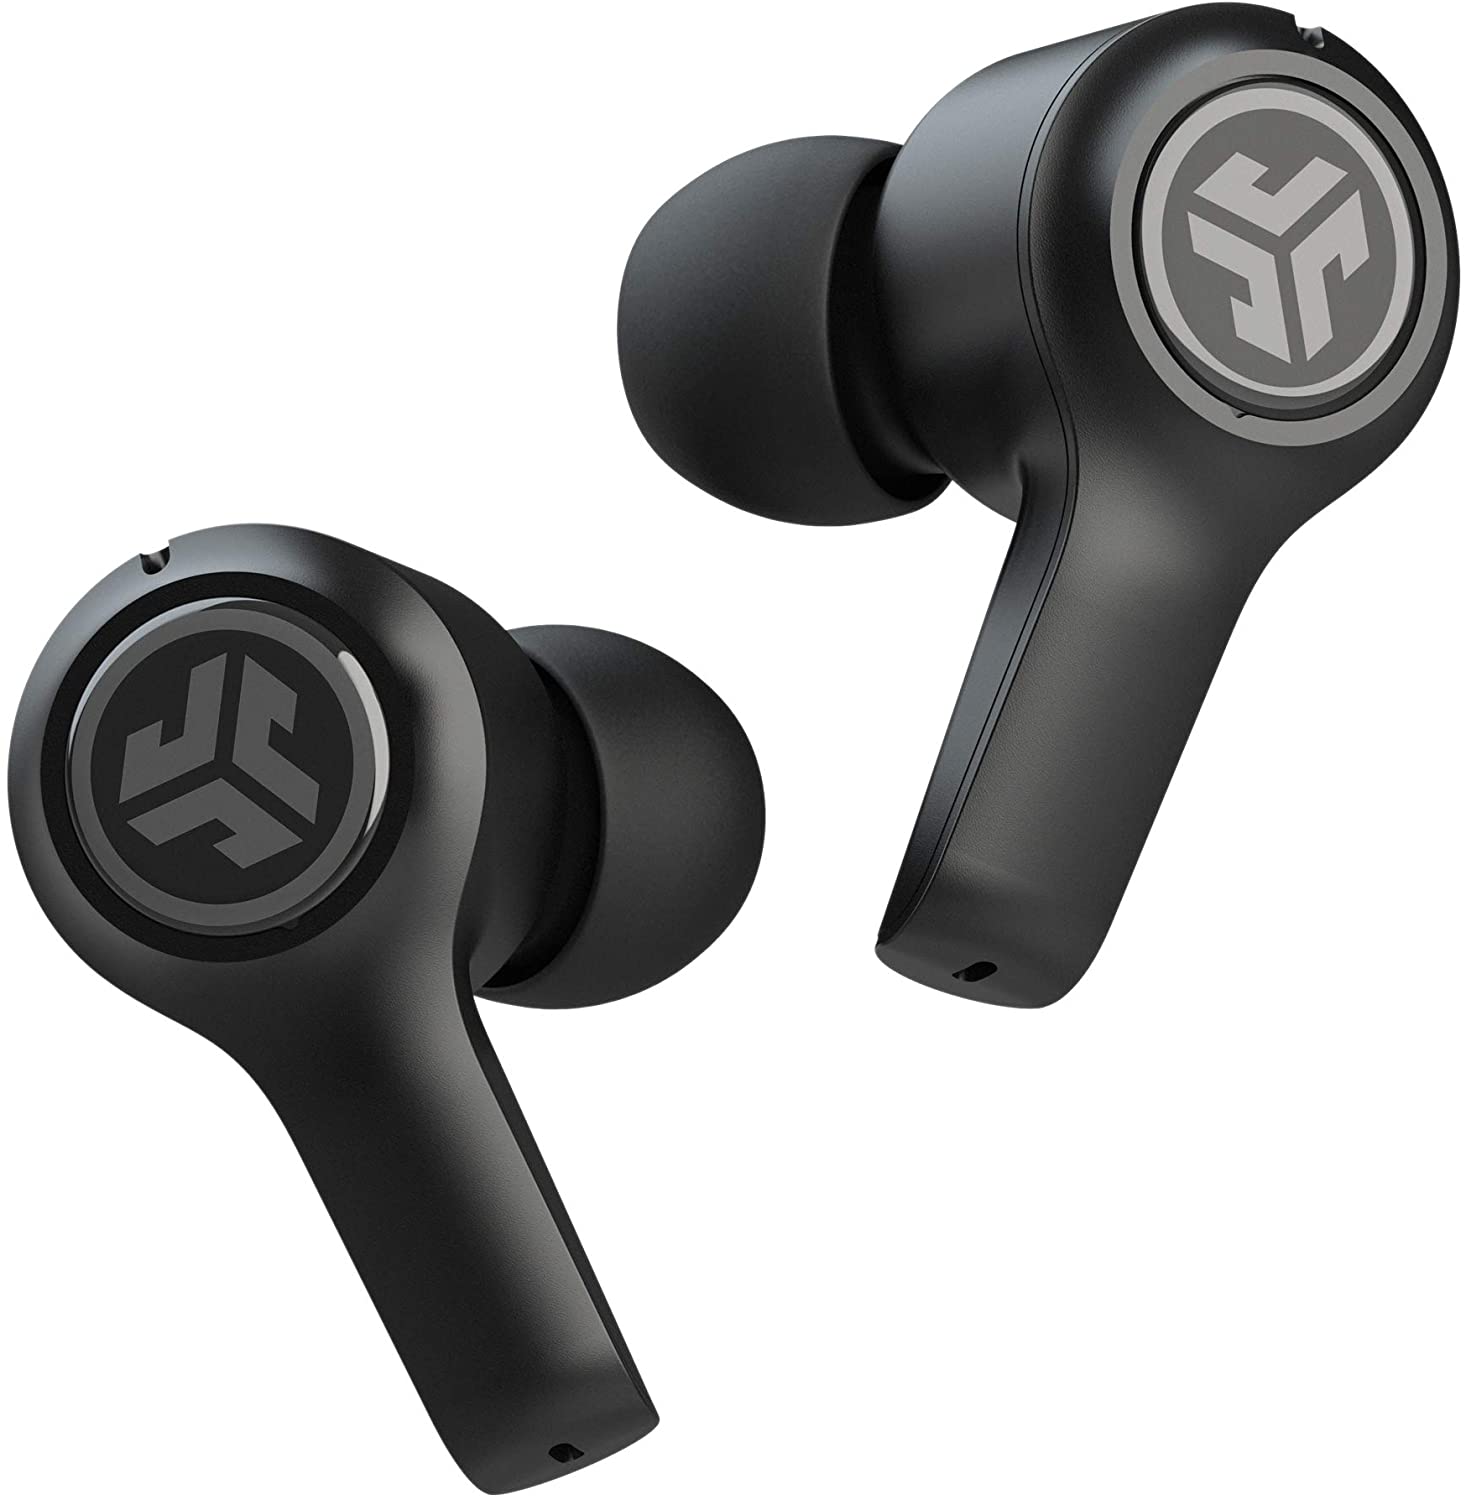 2 Pack JLab JBuds Air Executive True Wireless Bluetooth Earbuds with Charging Case - Black - Pro-Distributing